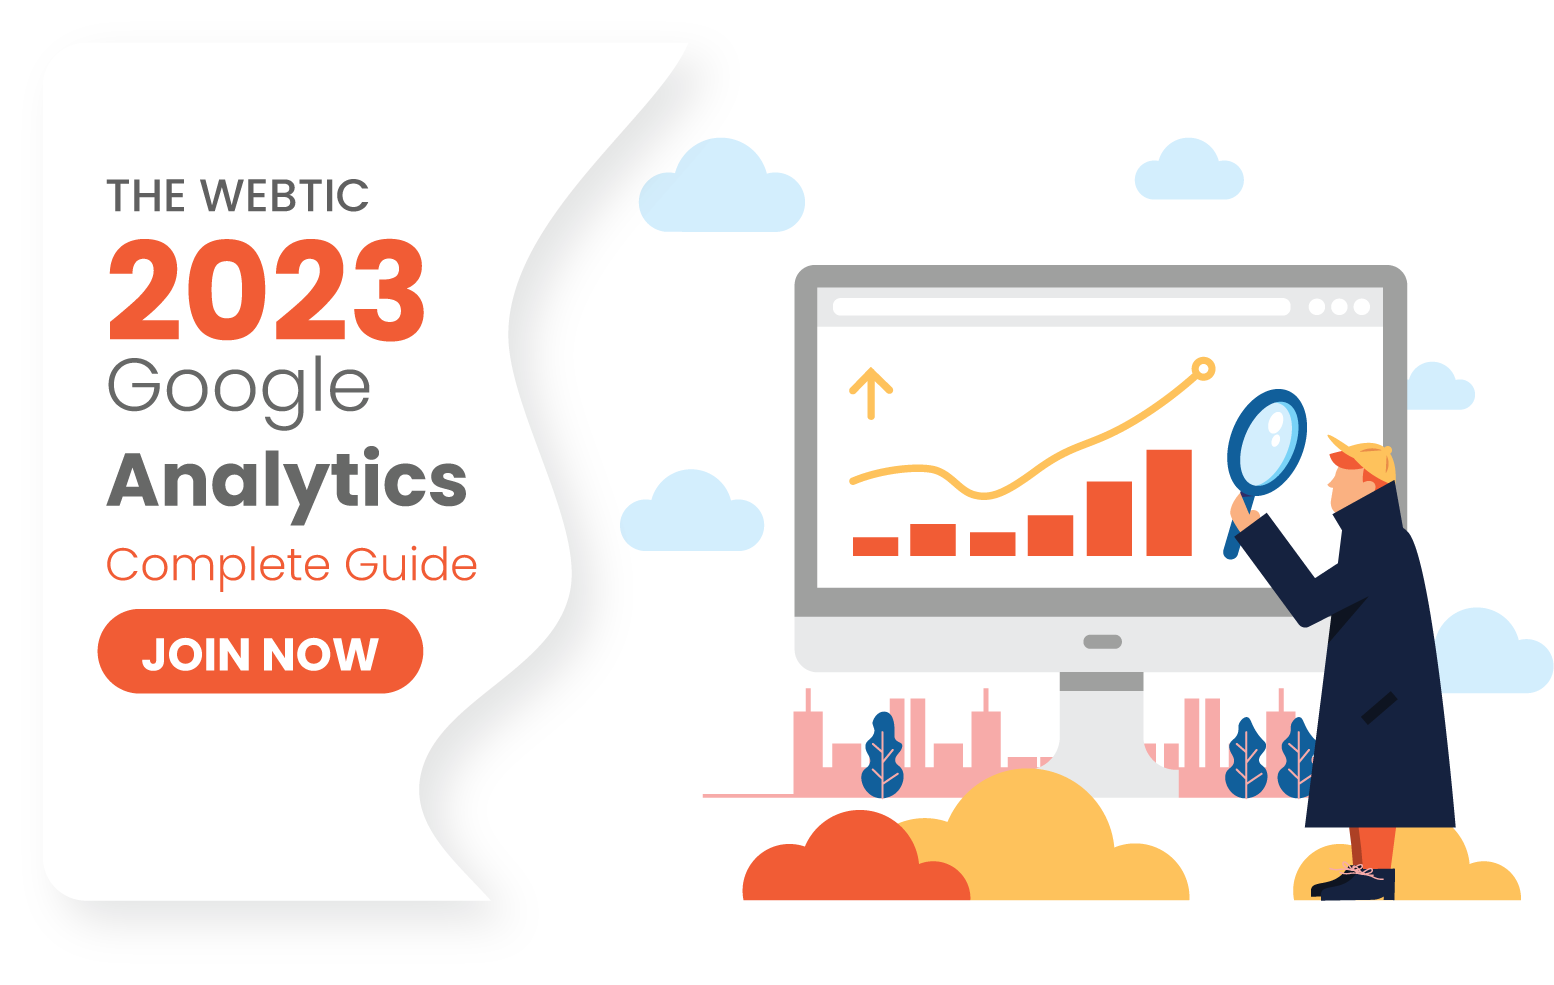 A Complete Guide to Learning Google Analytics